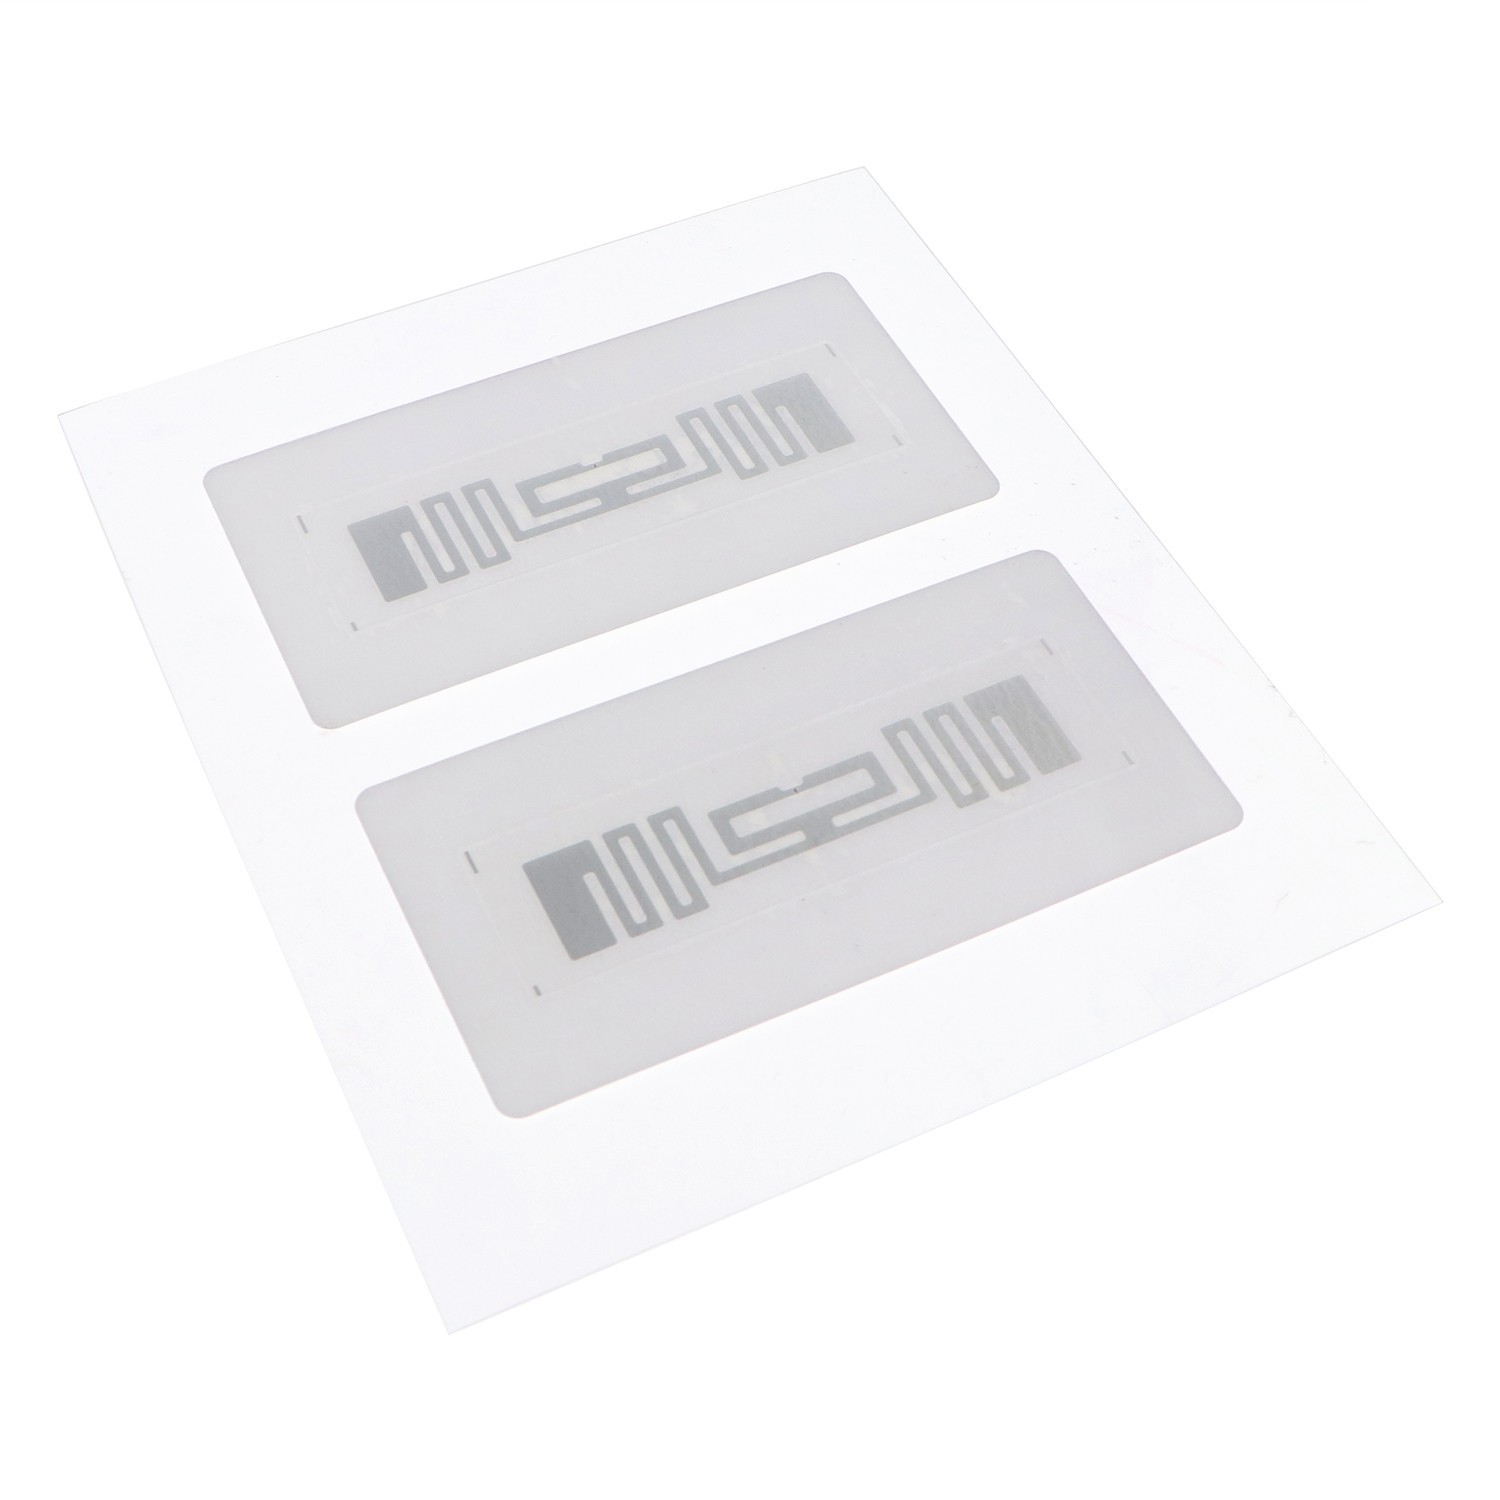 RFID one stop service | Label | Stickers | Hangtag | Packaging